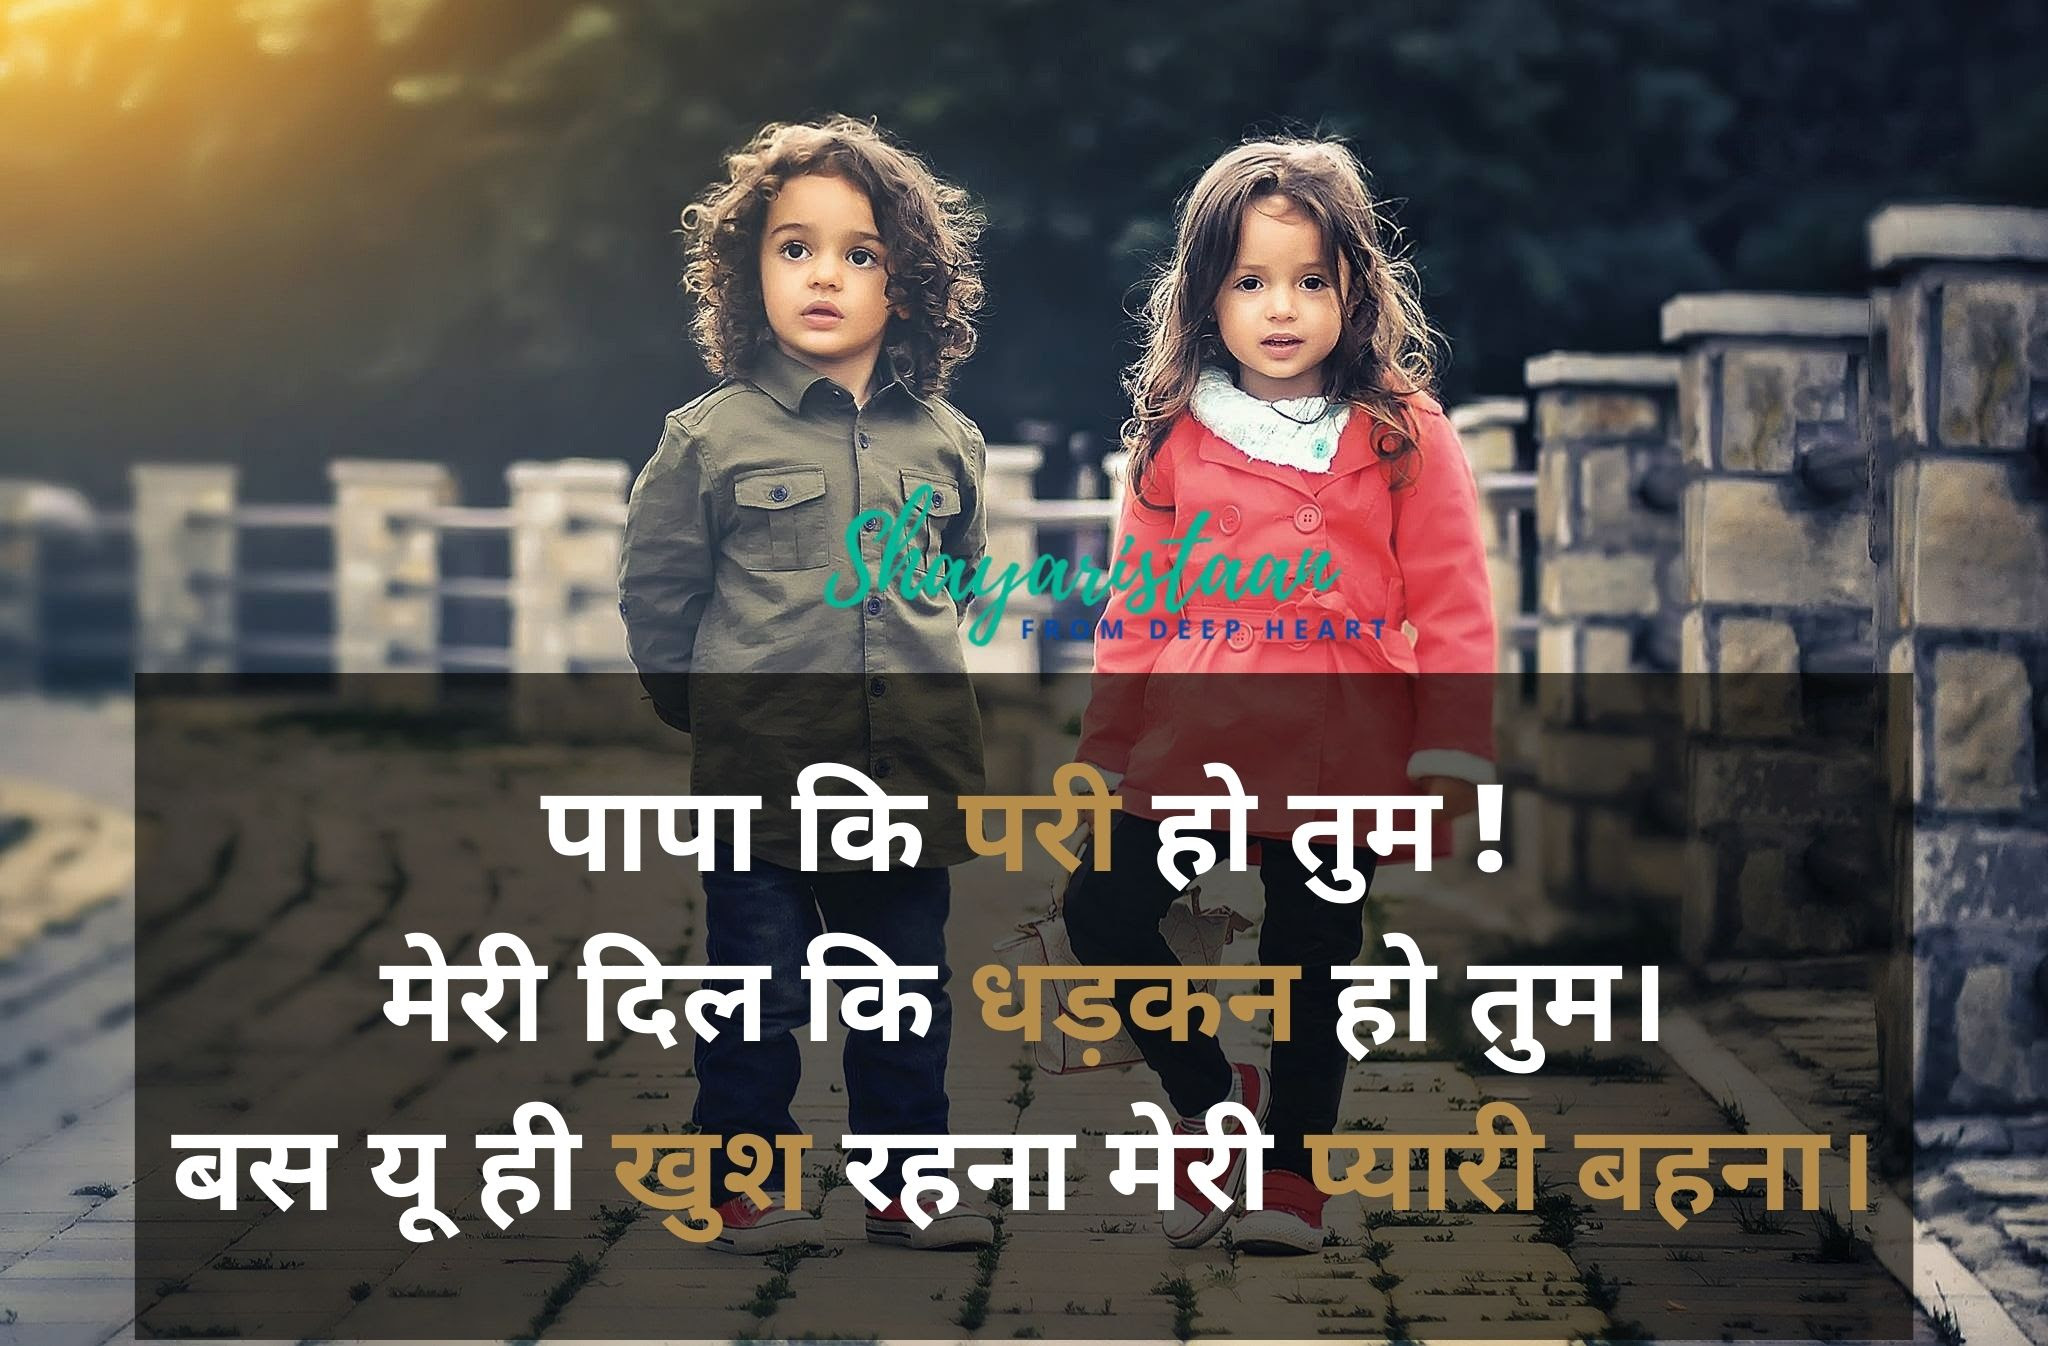 The oldest child always sets the bar. Shayari On Brother And Sister Relationship In Hindi Shayaristaan